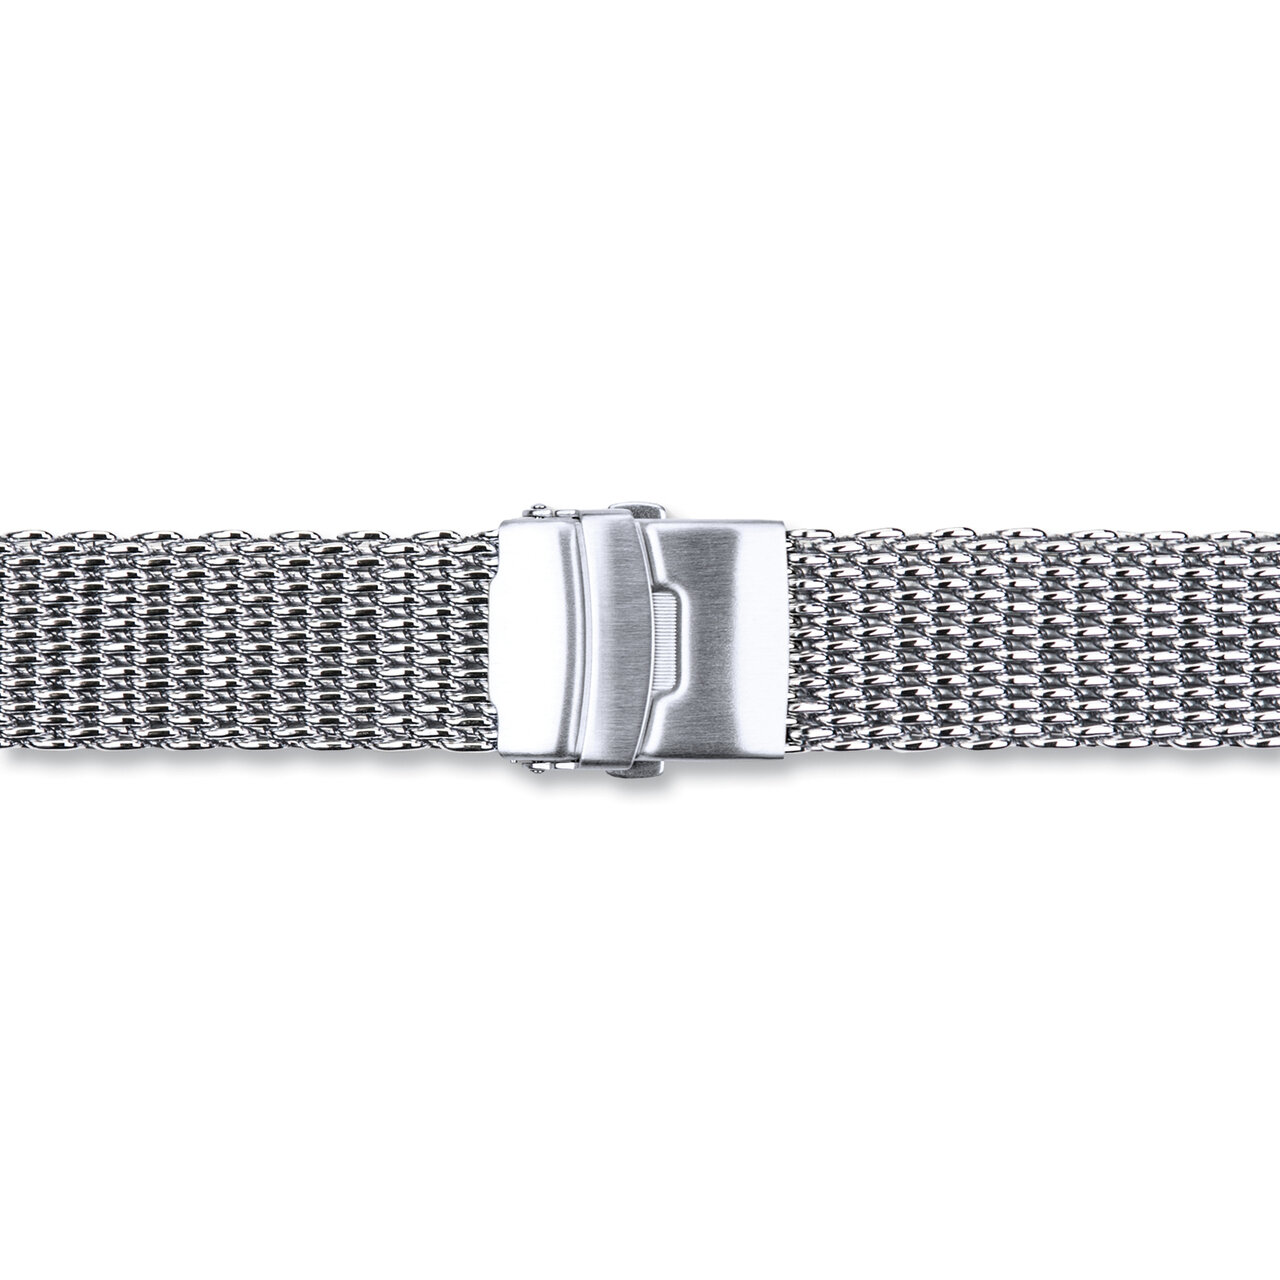 20mm Stainless Steel Shark Mesh with Divers Clasp Watch Band BA419-20